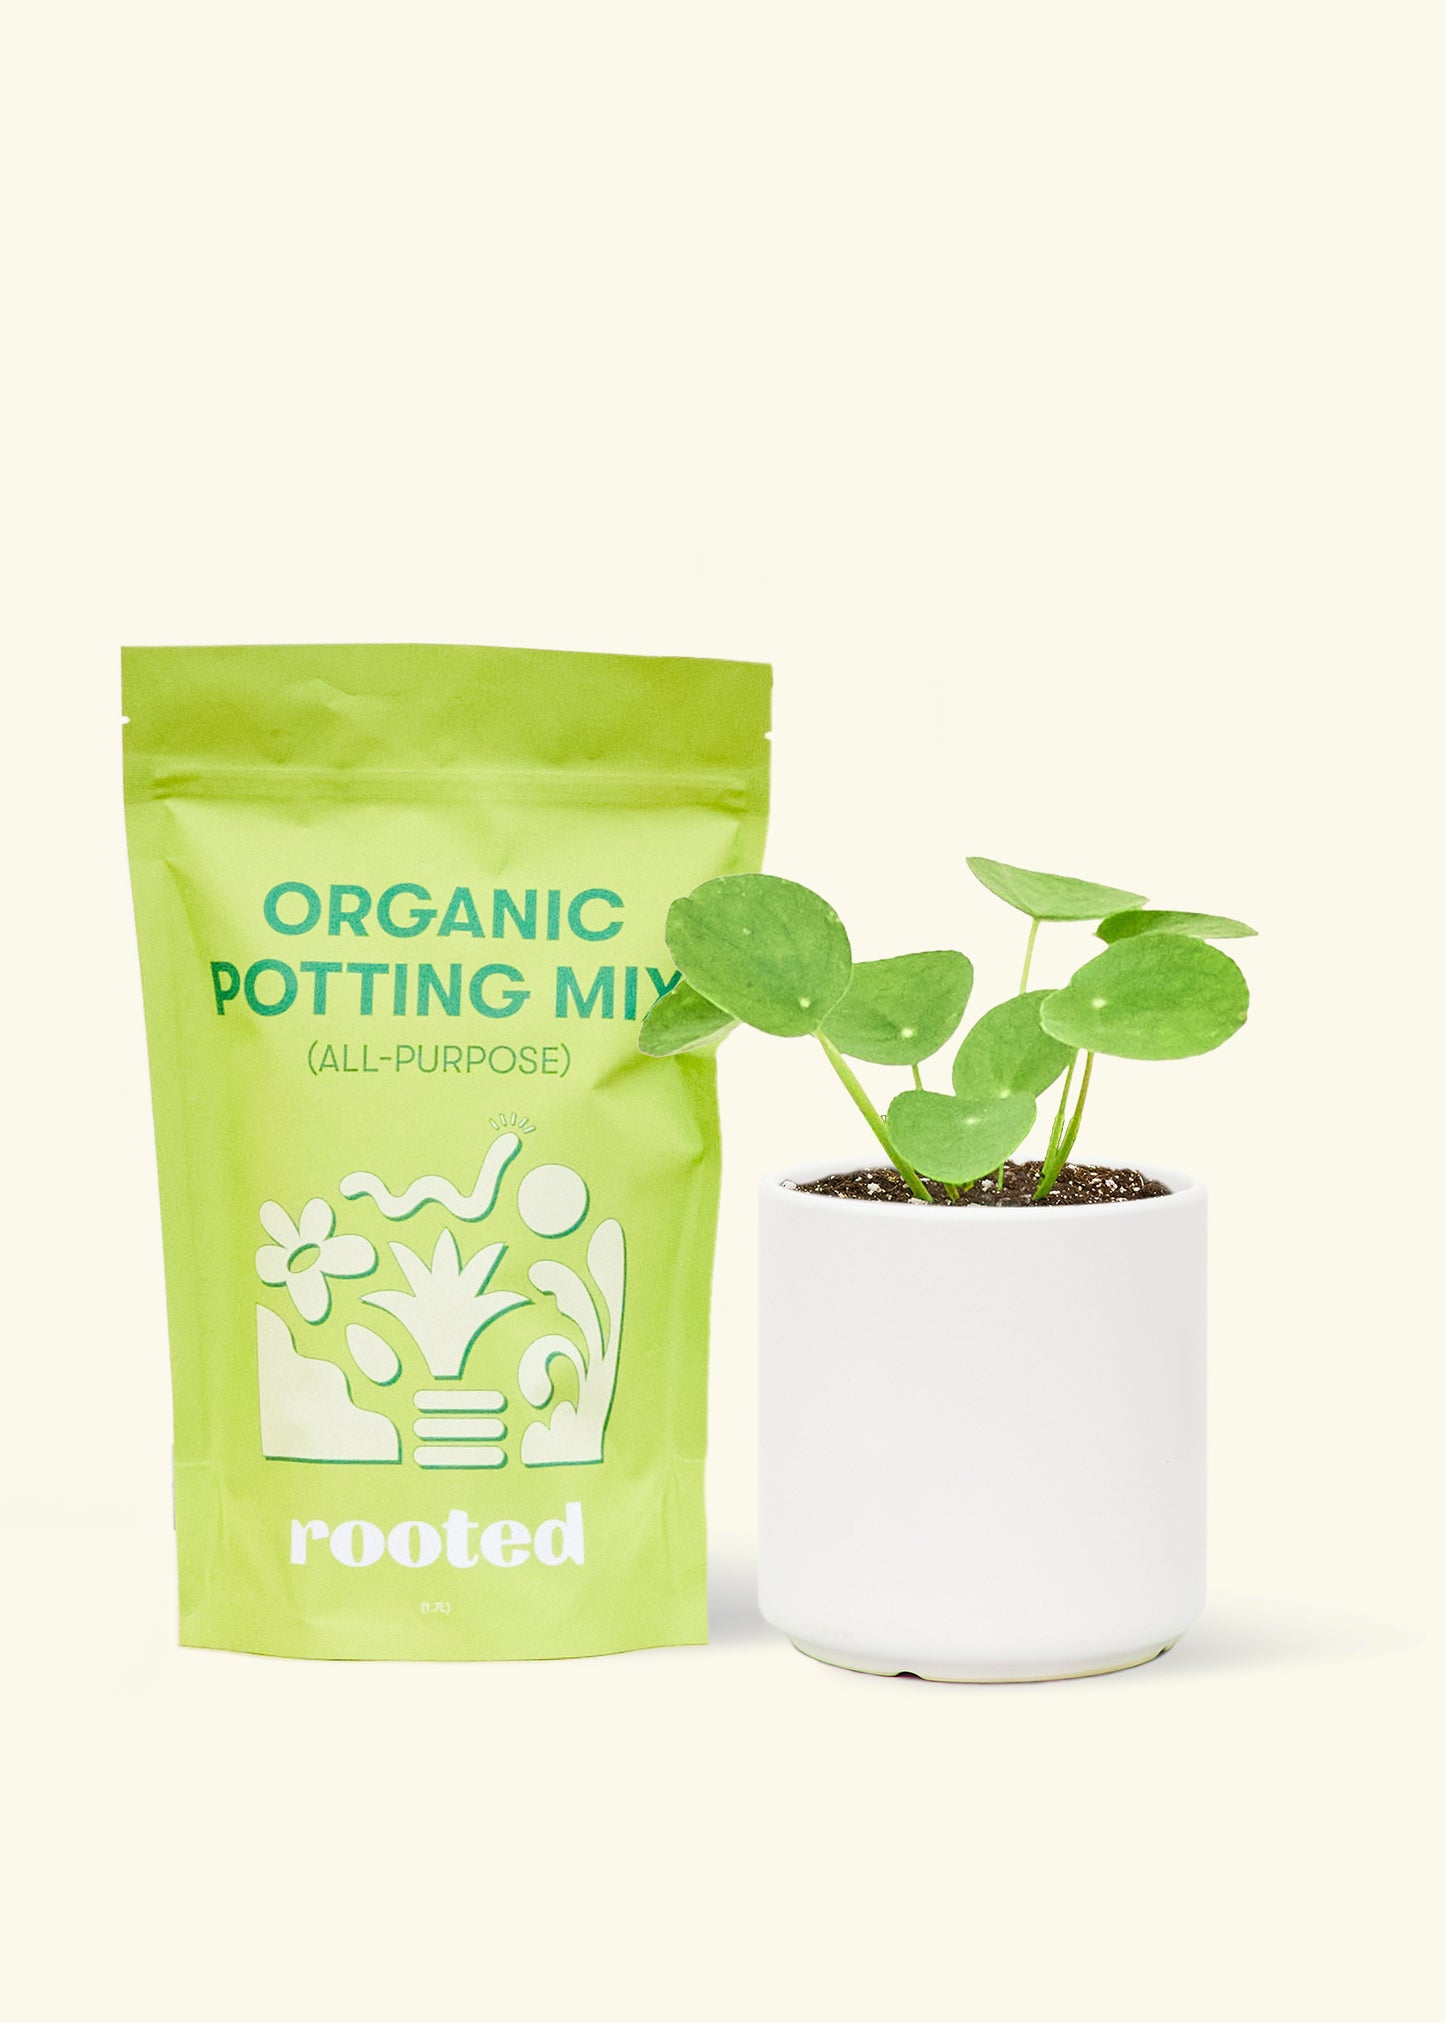 A bag of Organic Potting Mix to the left of a Chinese Money Plant in a white cylinder ceramic pot.